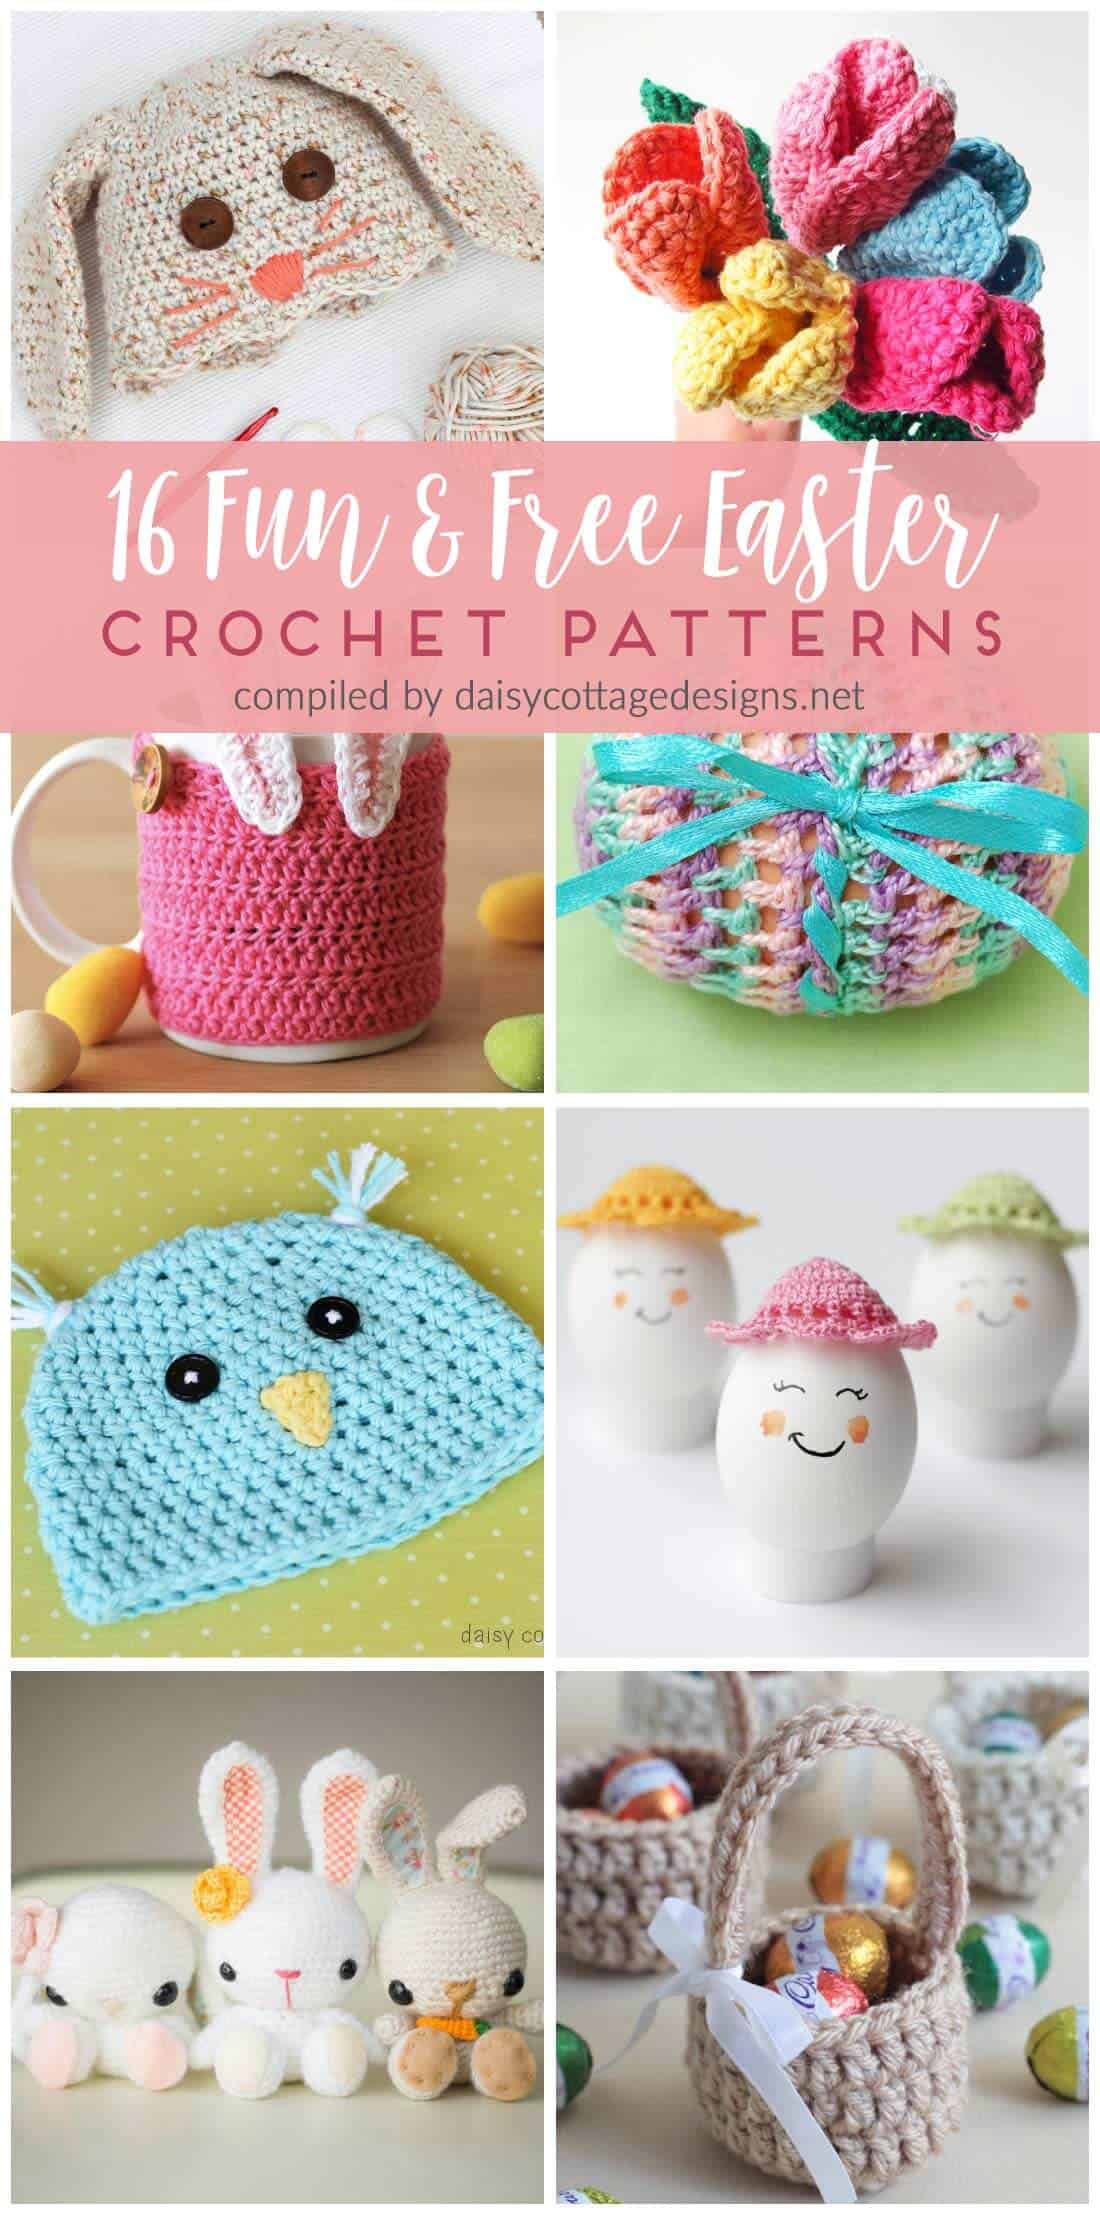 Free Crochet Patterns | Crochet Patterns for Easter | Crochet Patterns for Spring | Flower Crochet Patterns | Fun Crochet Patterns | Use these adorable free crochet patterns to make something that will get you in the mood for Spring. These fun patterns are perfect for Easter baskets and more!